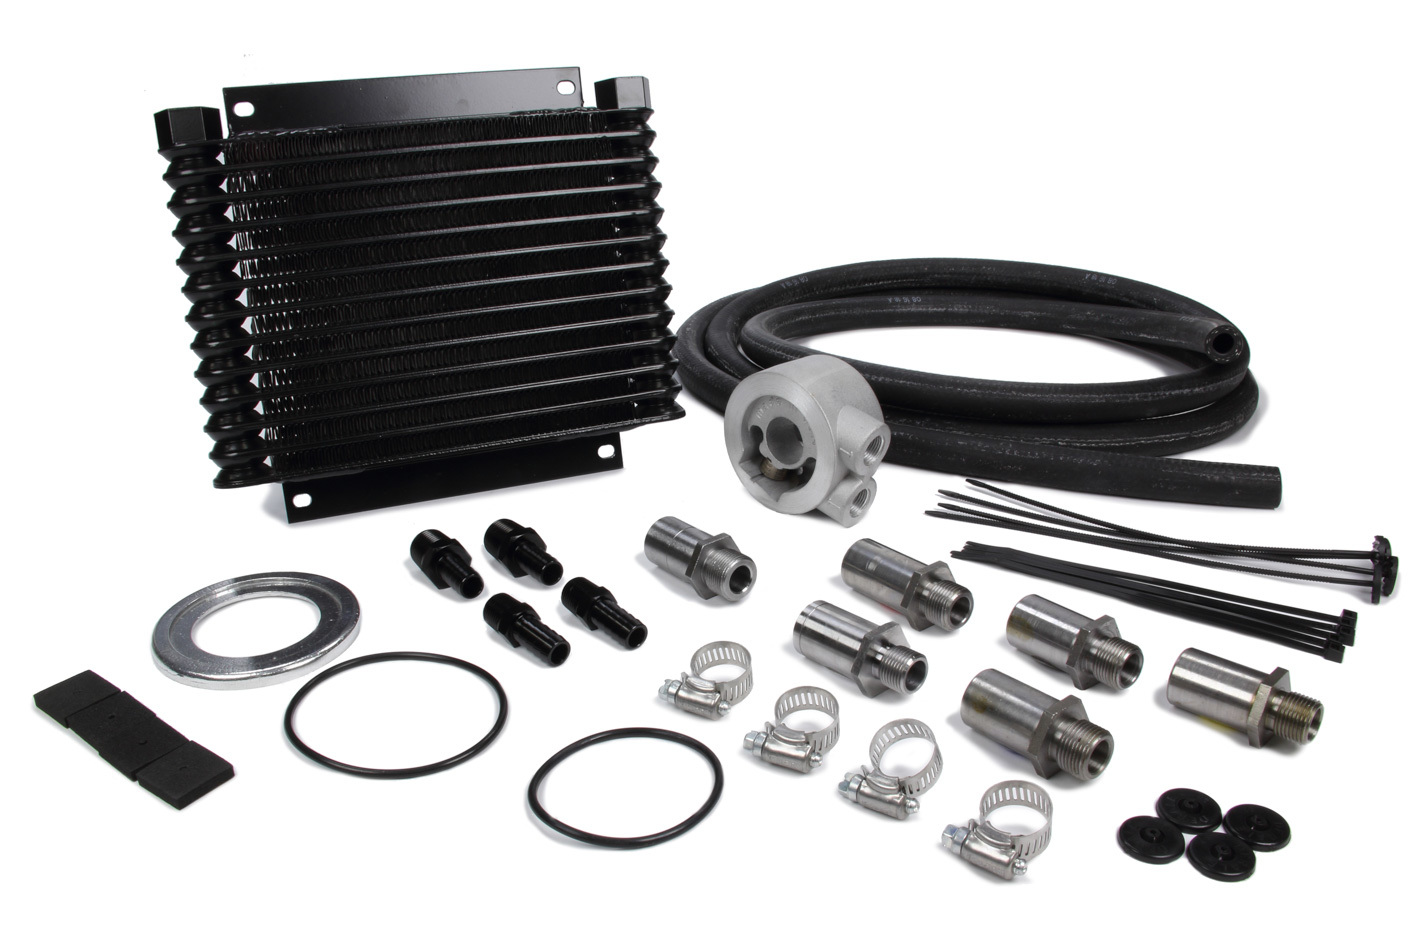 13 Row Plate & Fin Engine Oil Cooler Kit with Sandwich Adapter - 15405